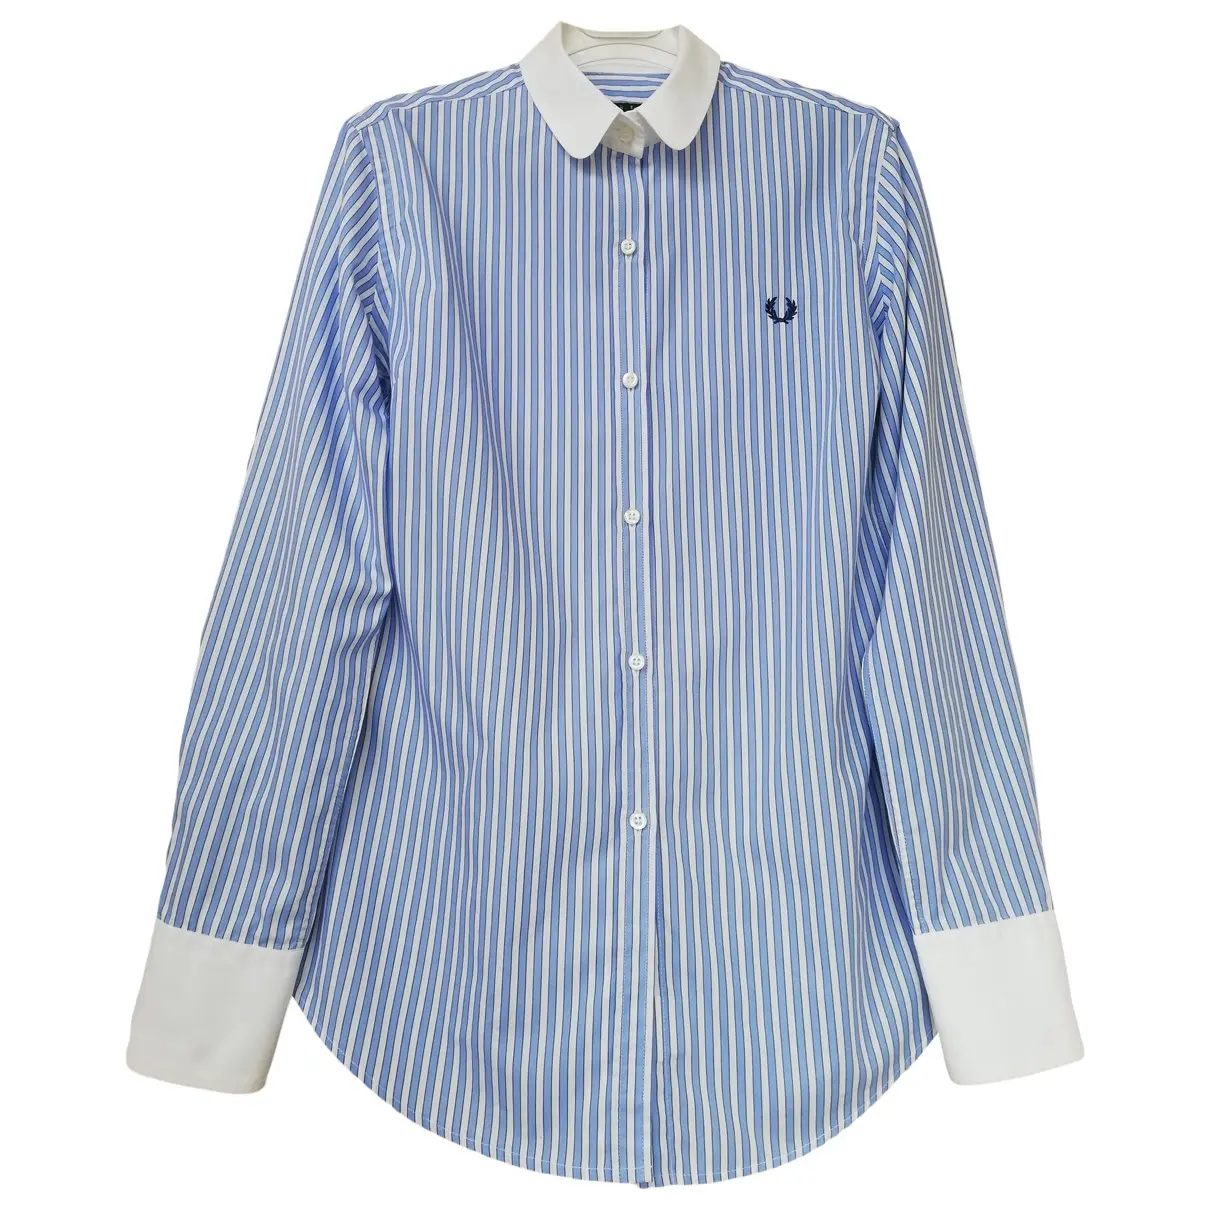 Shirt Fred Perry - Vintage